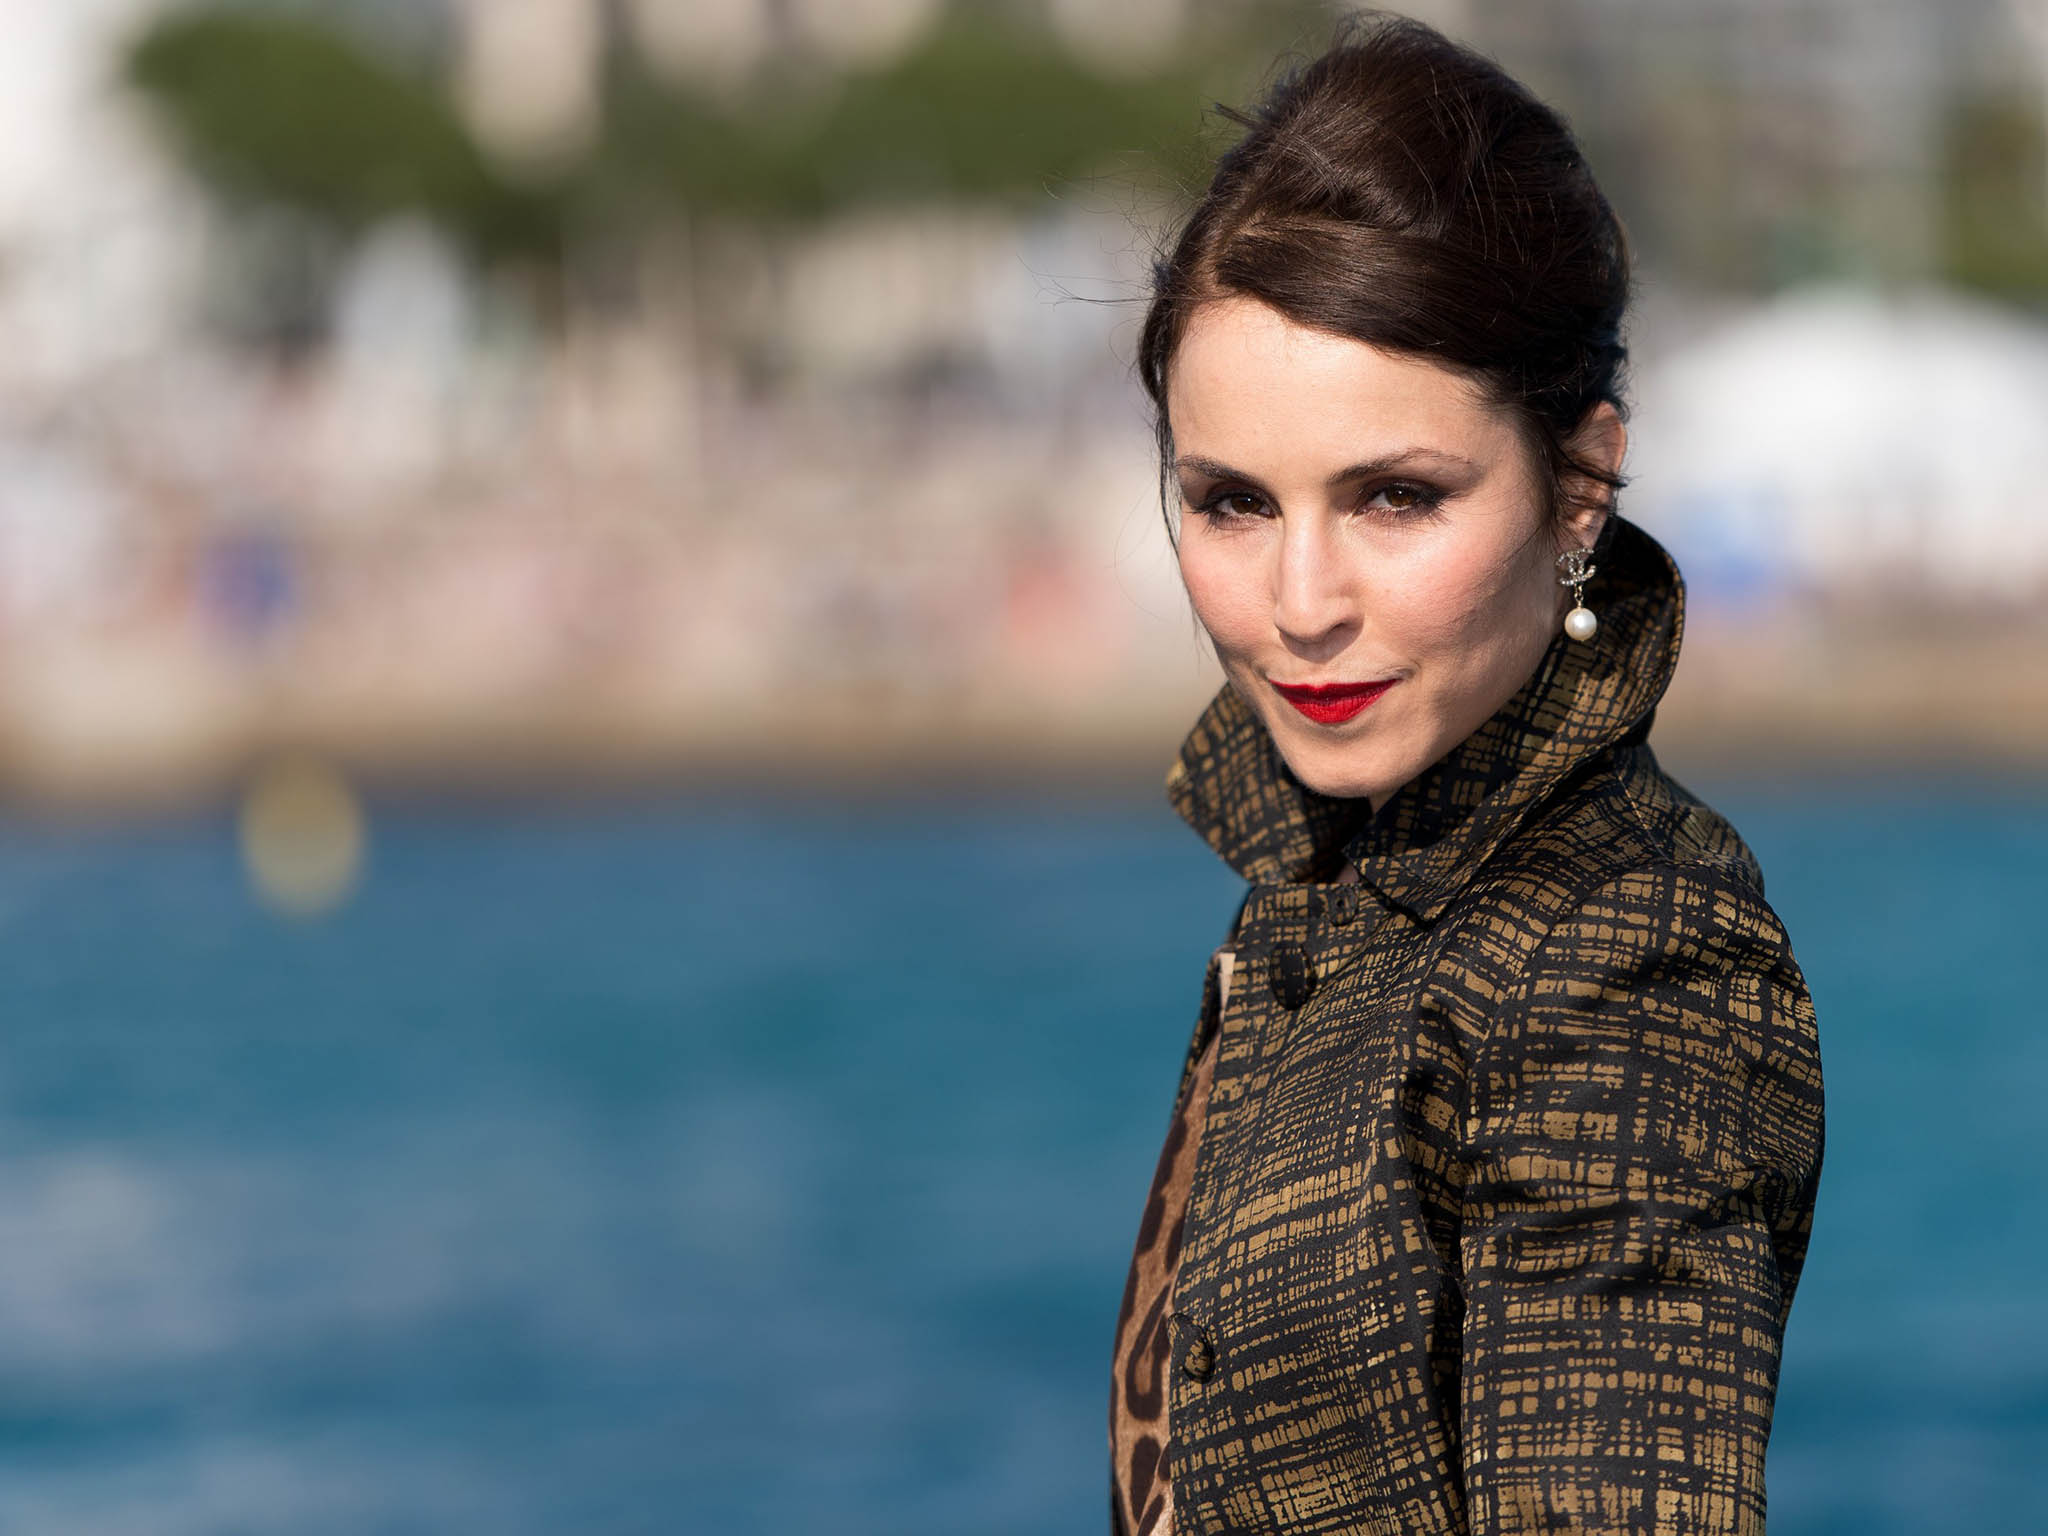 Noomi Rapace during the 68th annual Cannes Film Festival